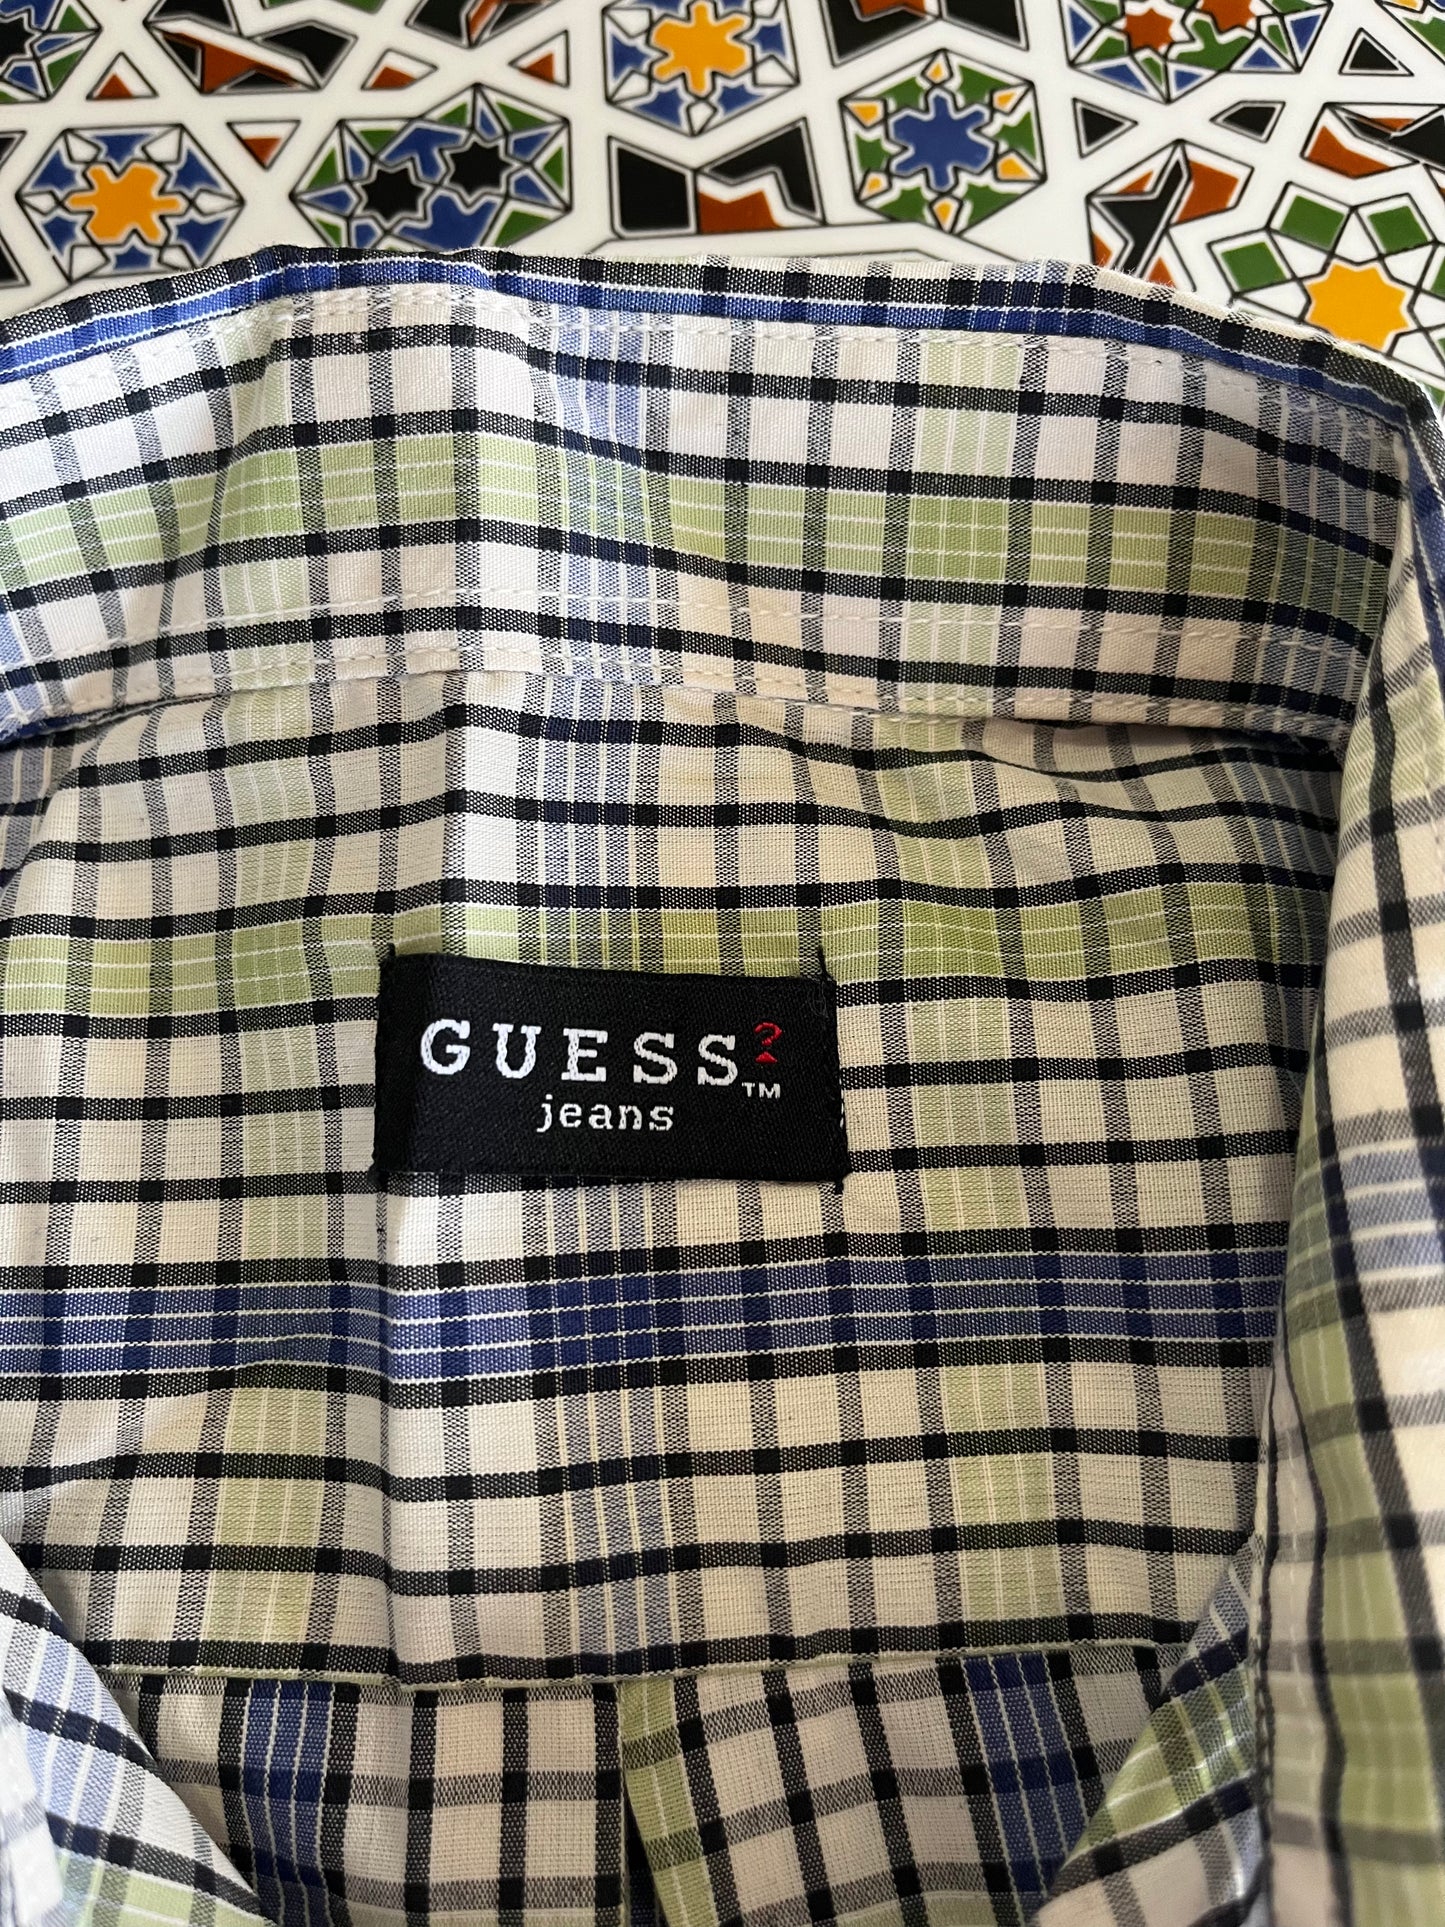 L guess jeans short sleeved button-up shirt